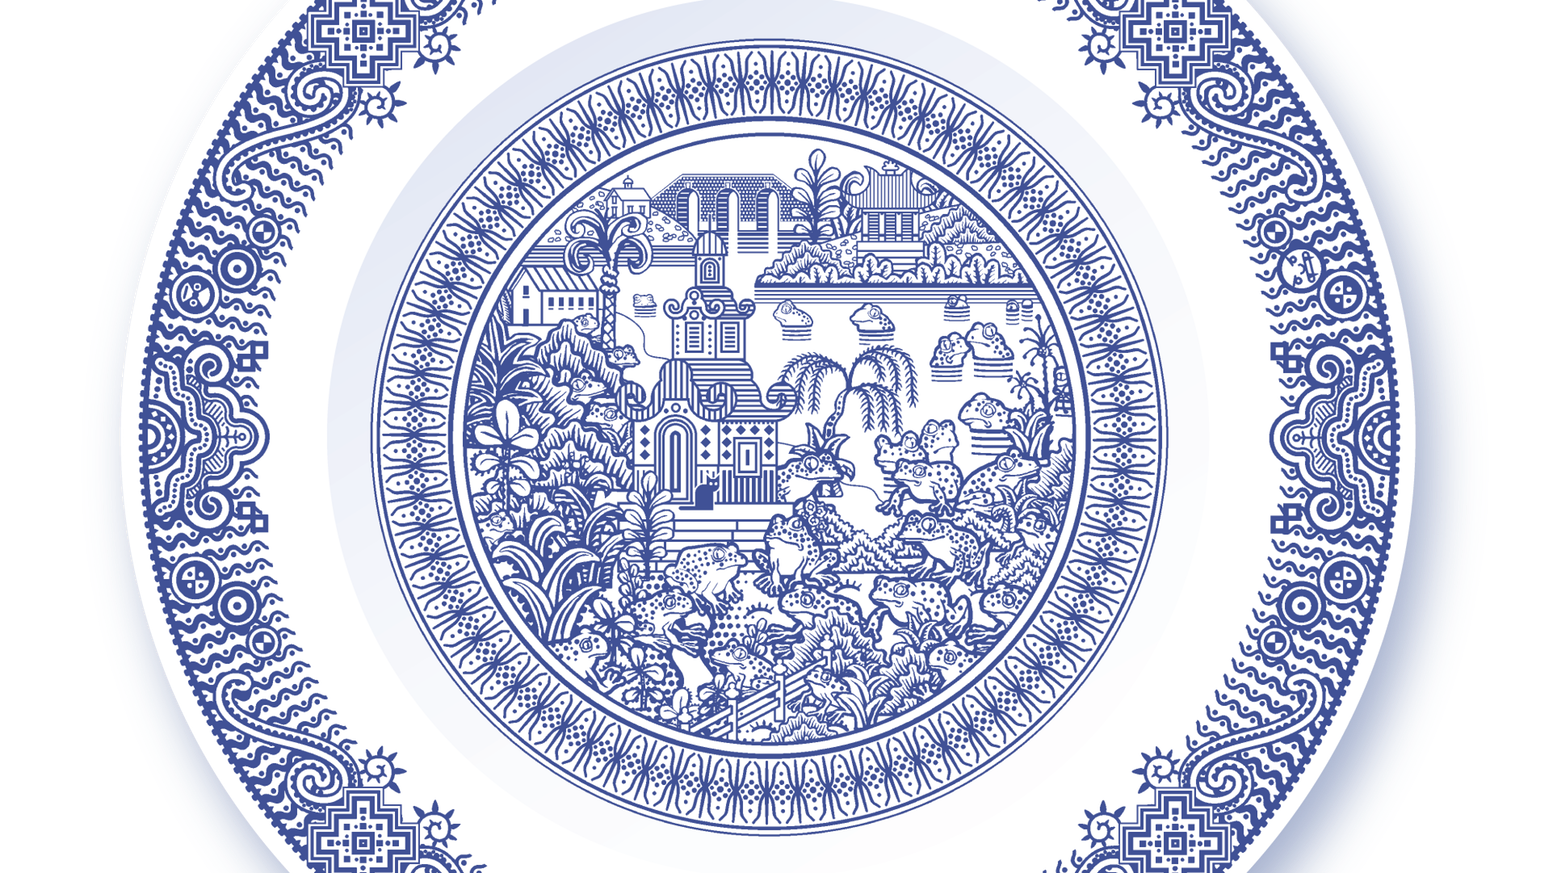 dishes clipart blue plate